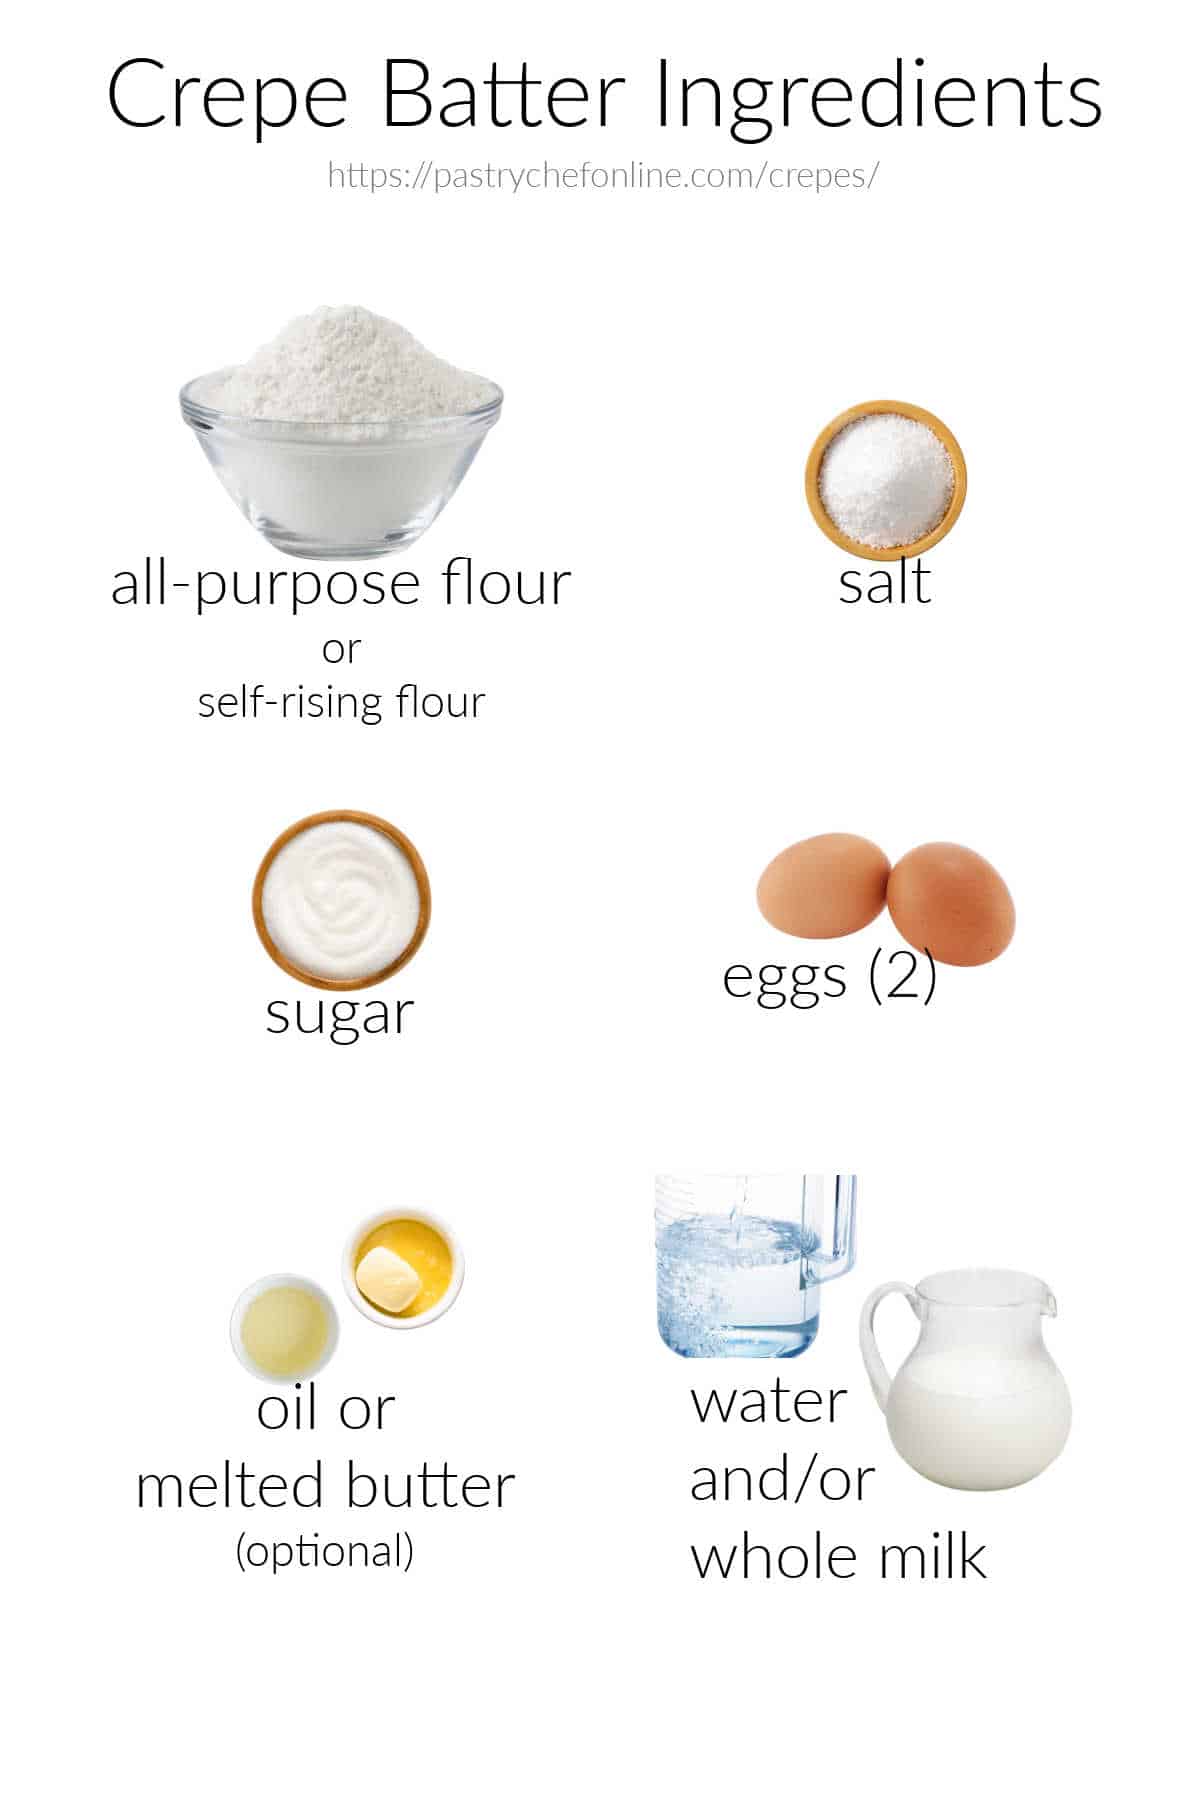 Images of all the ingredients needed to make crepes, labeled and on a white background.